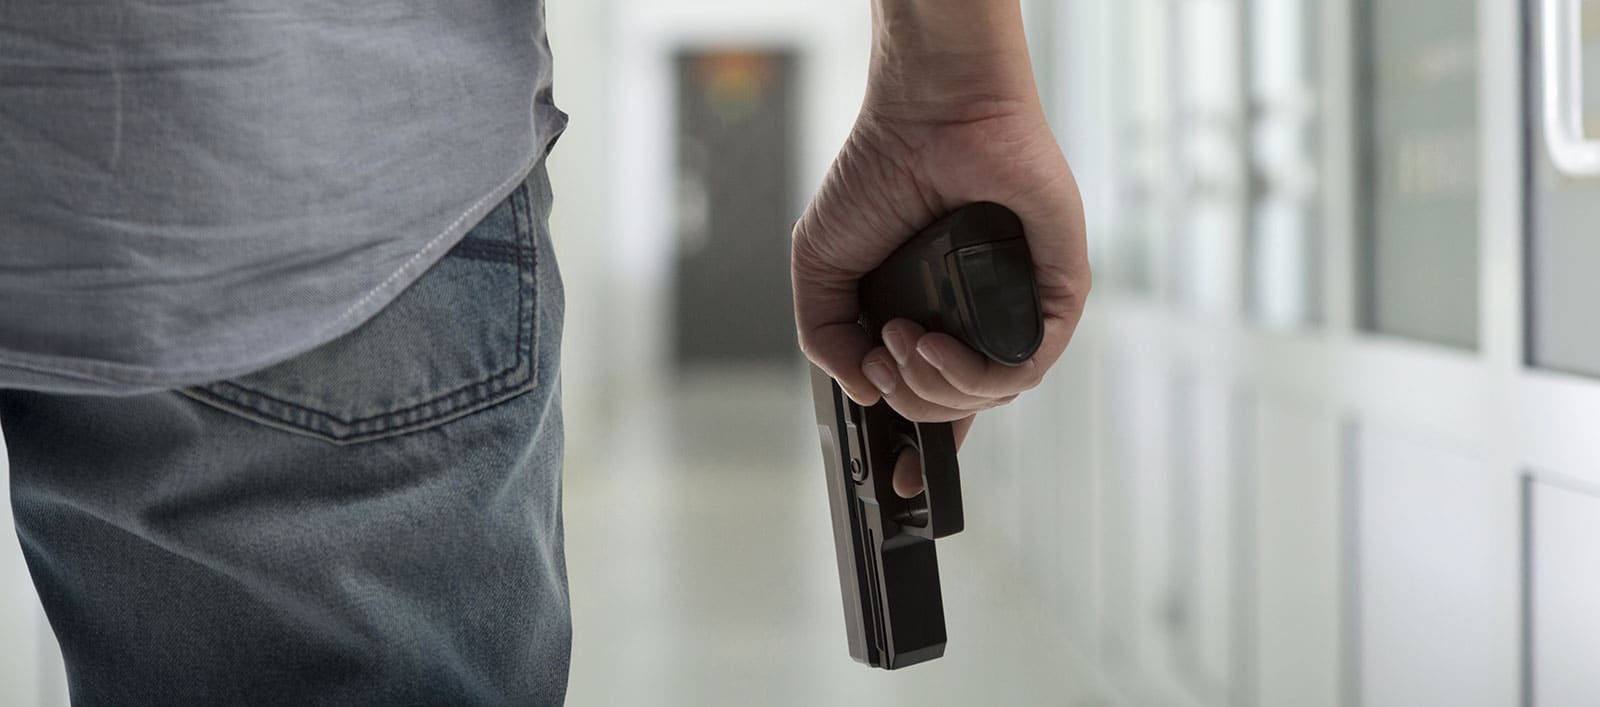 workplace violence insurance, Active Shooter